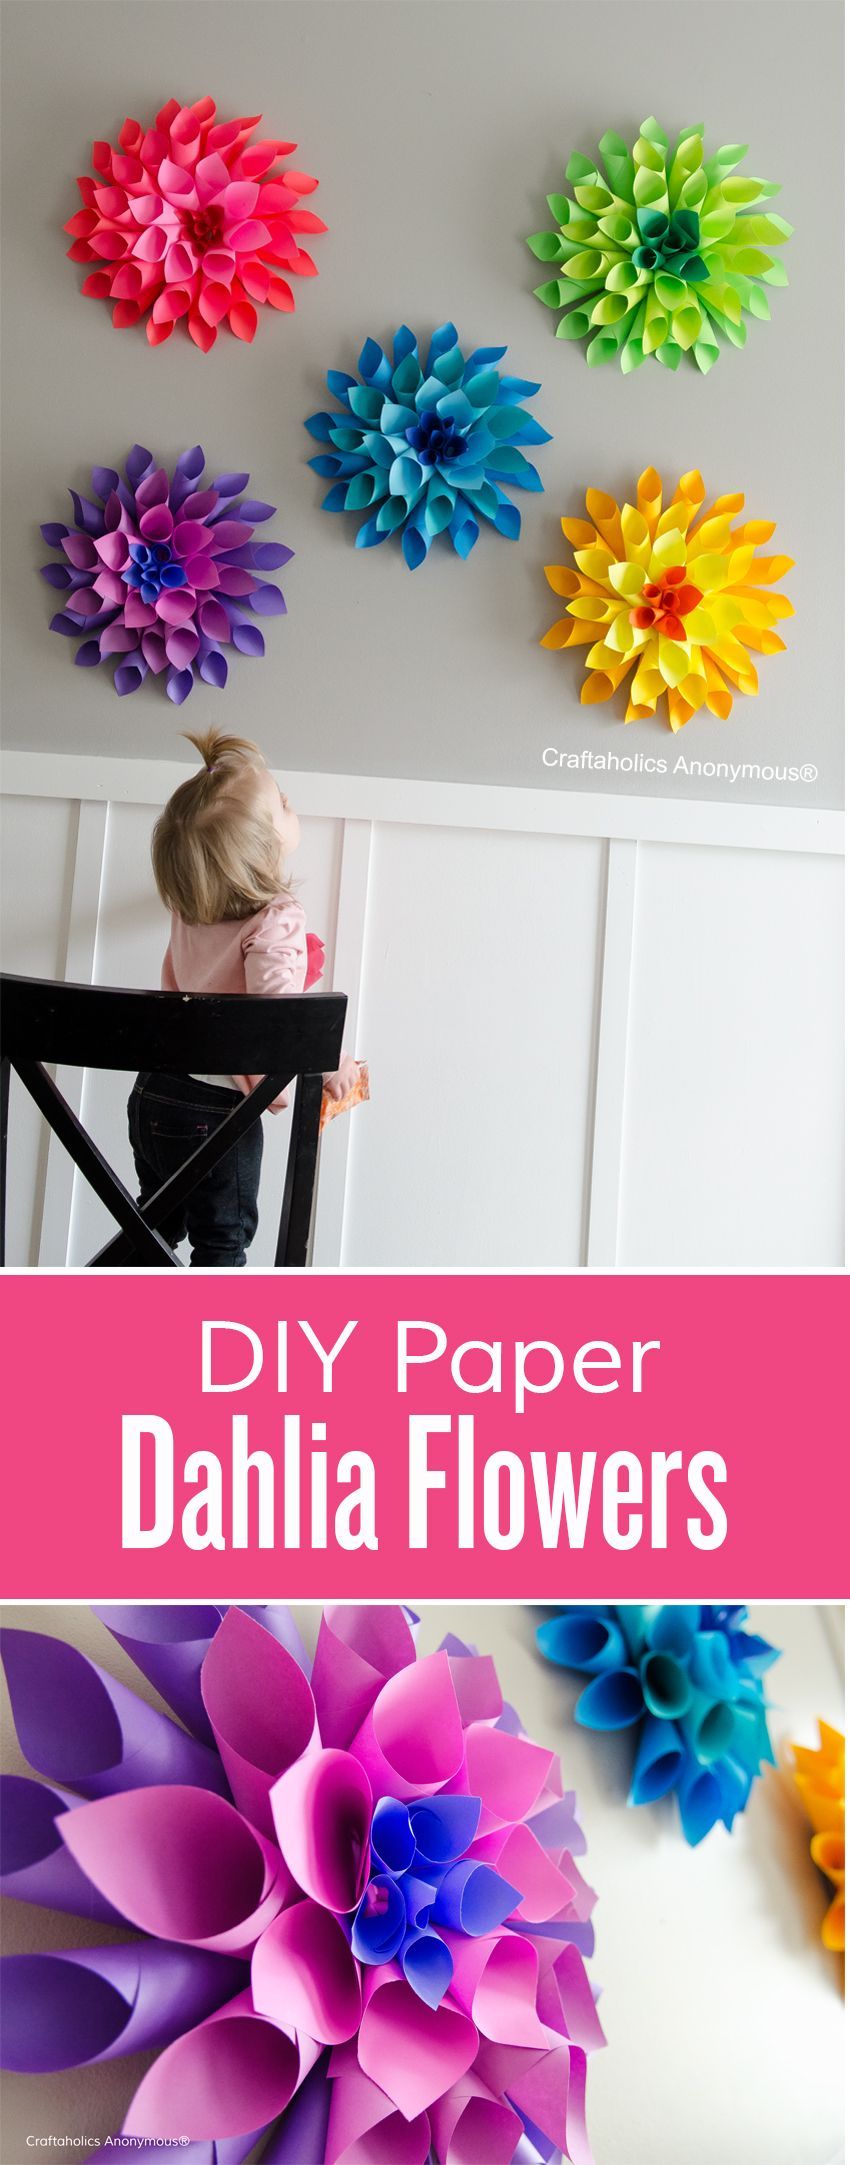 DIY Paper Dahlia flowers tutorial || Love the rainbow of colors! Perfect for Spring or Easter.